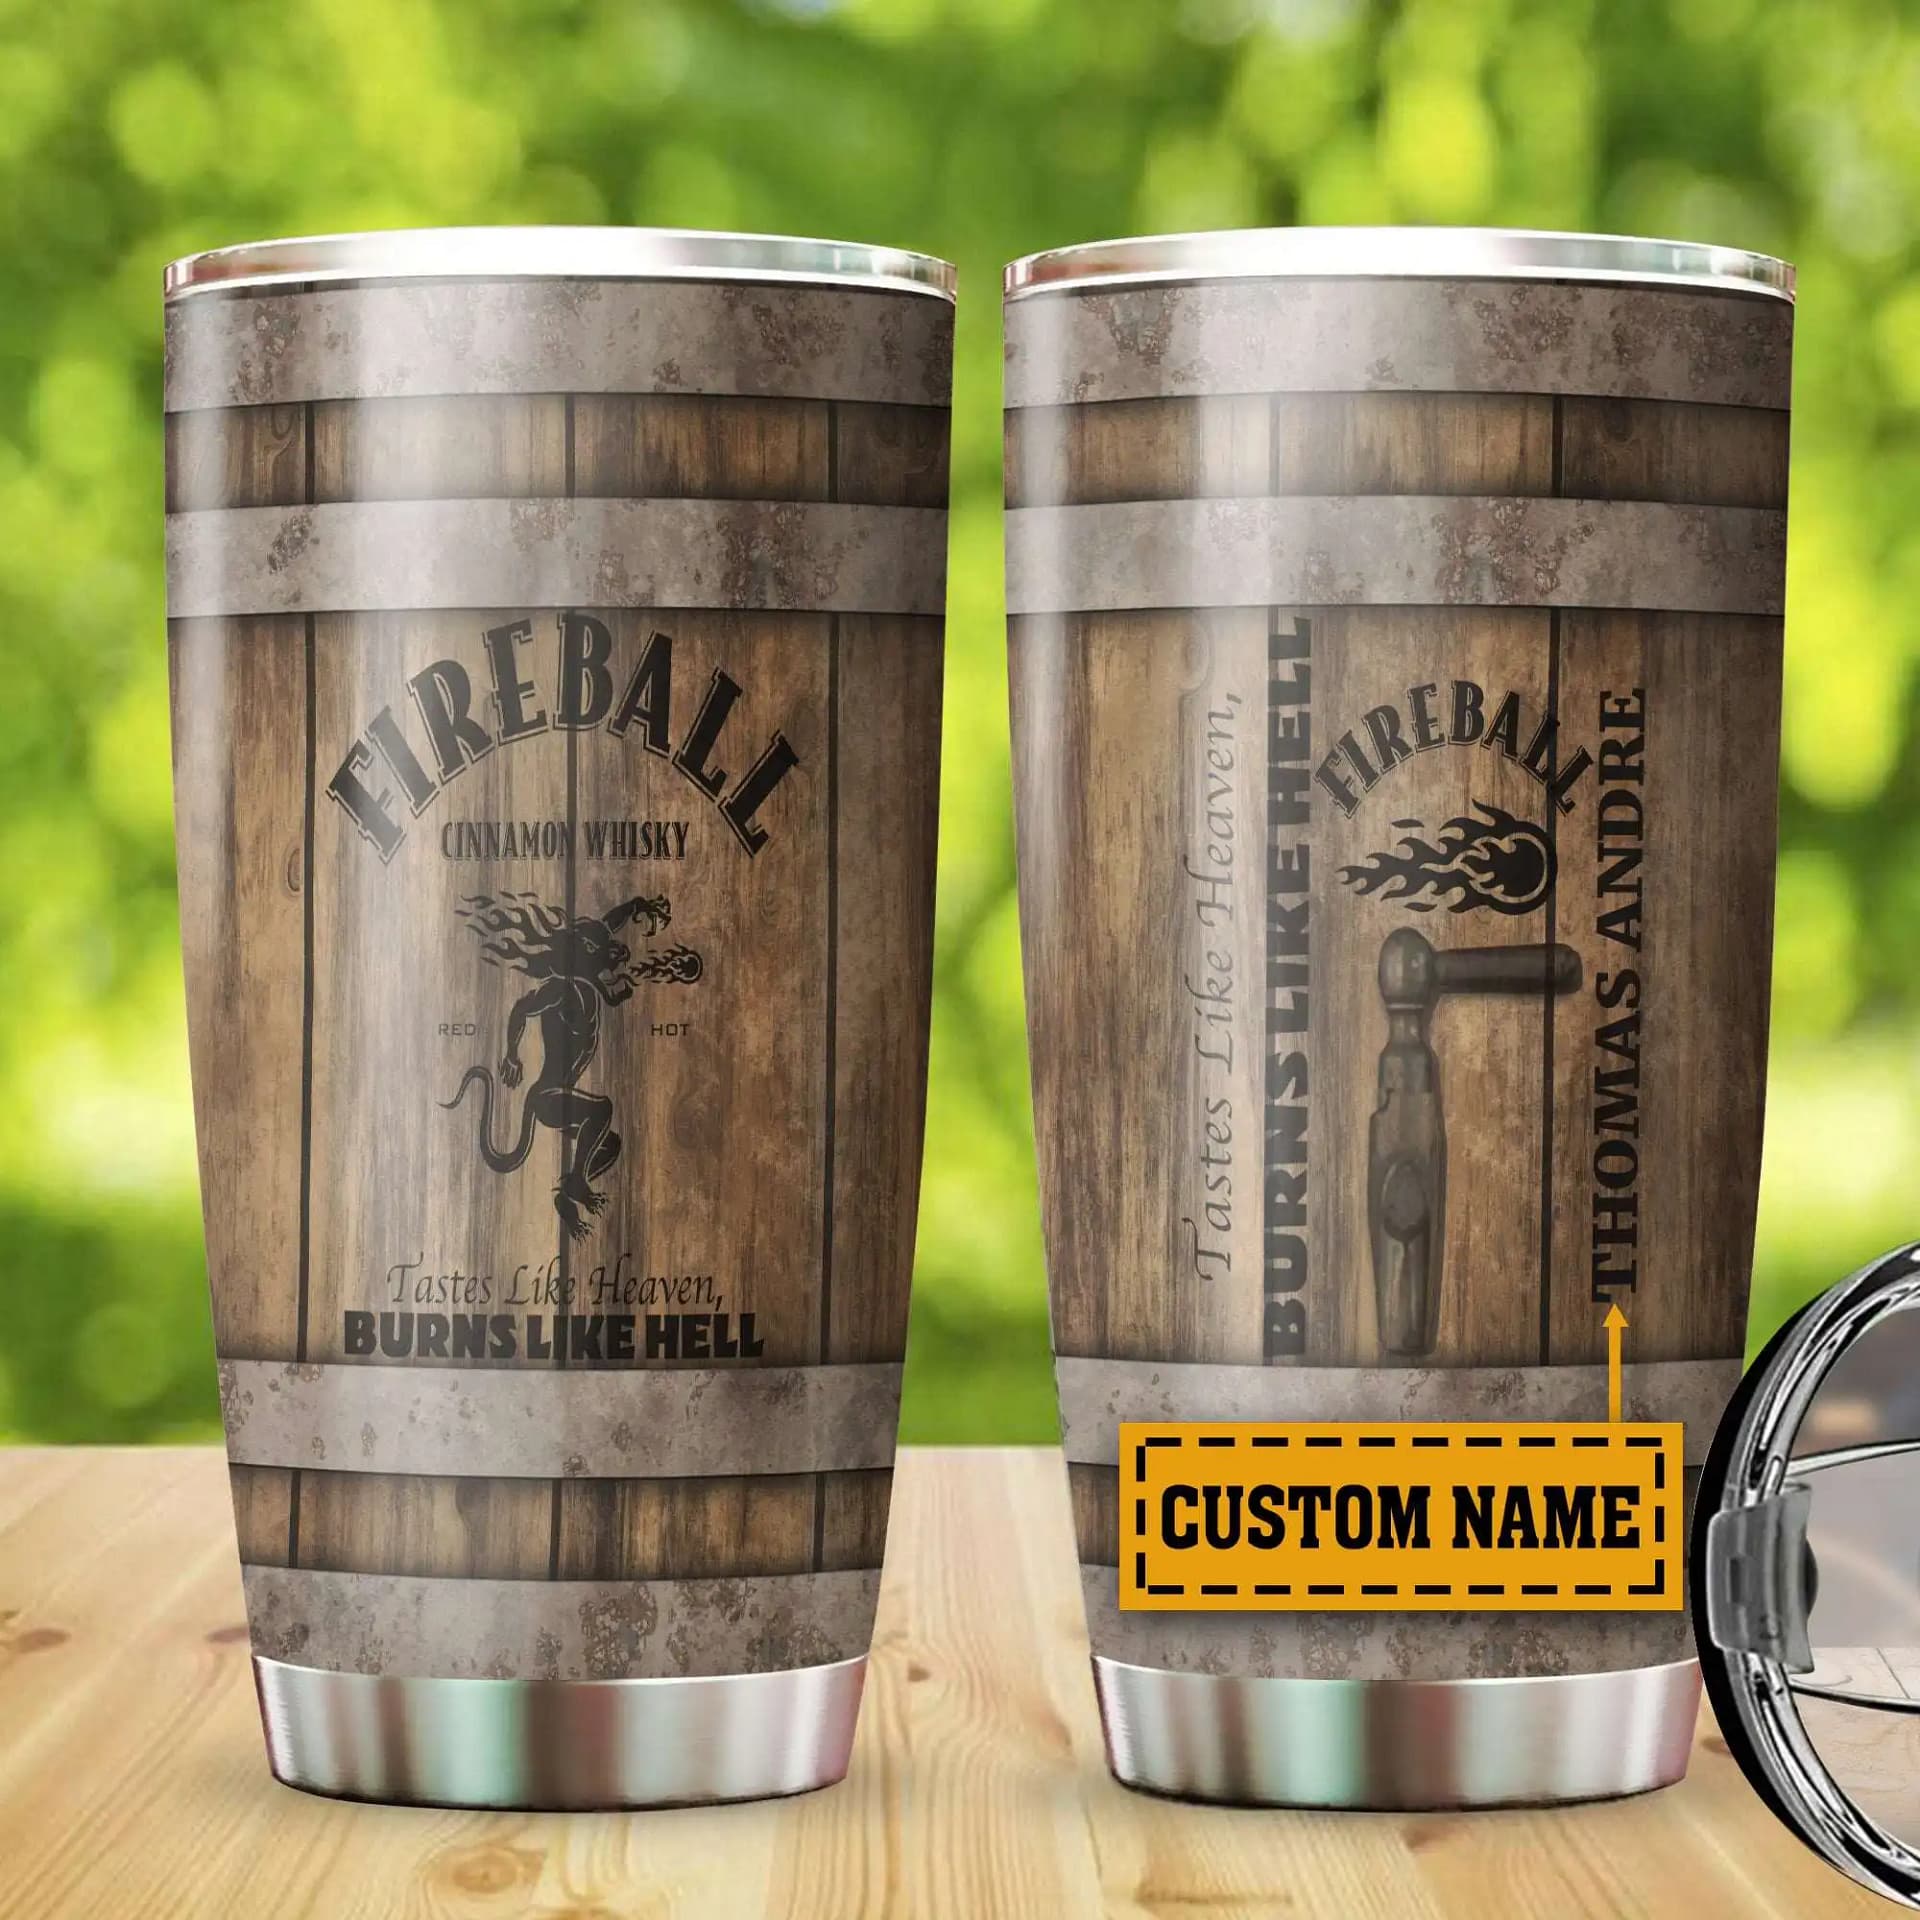 Personalized Fireball Cinnamon Whisky Wine Wooden Barrel Customize Stainless Steel Tumbler